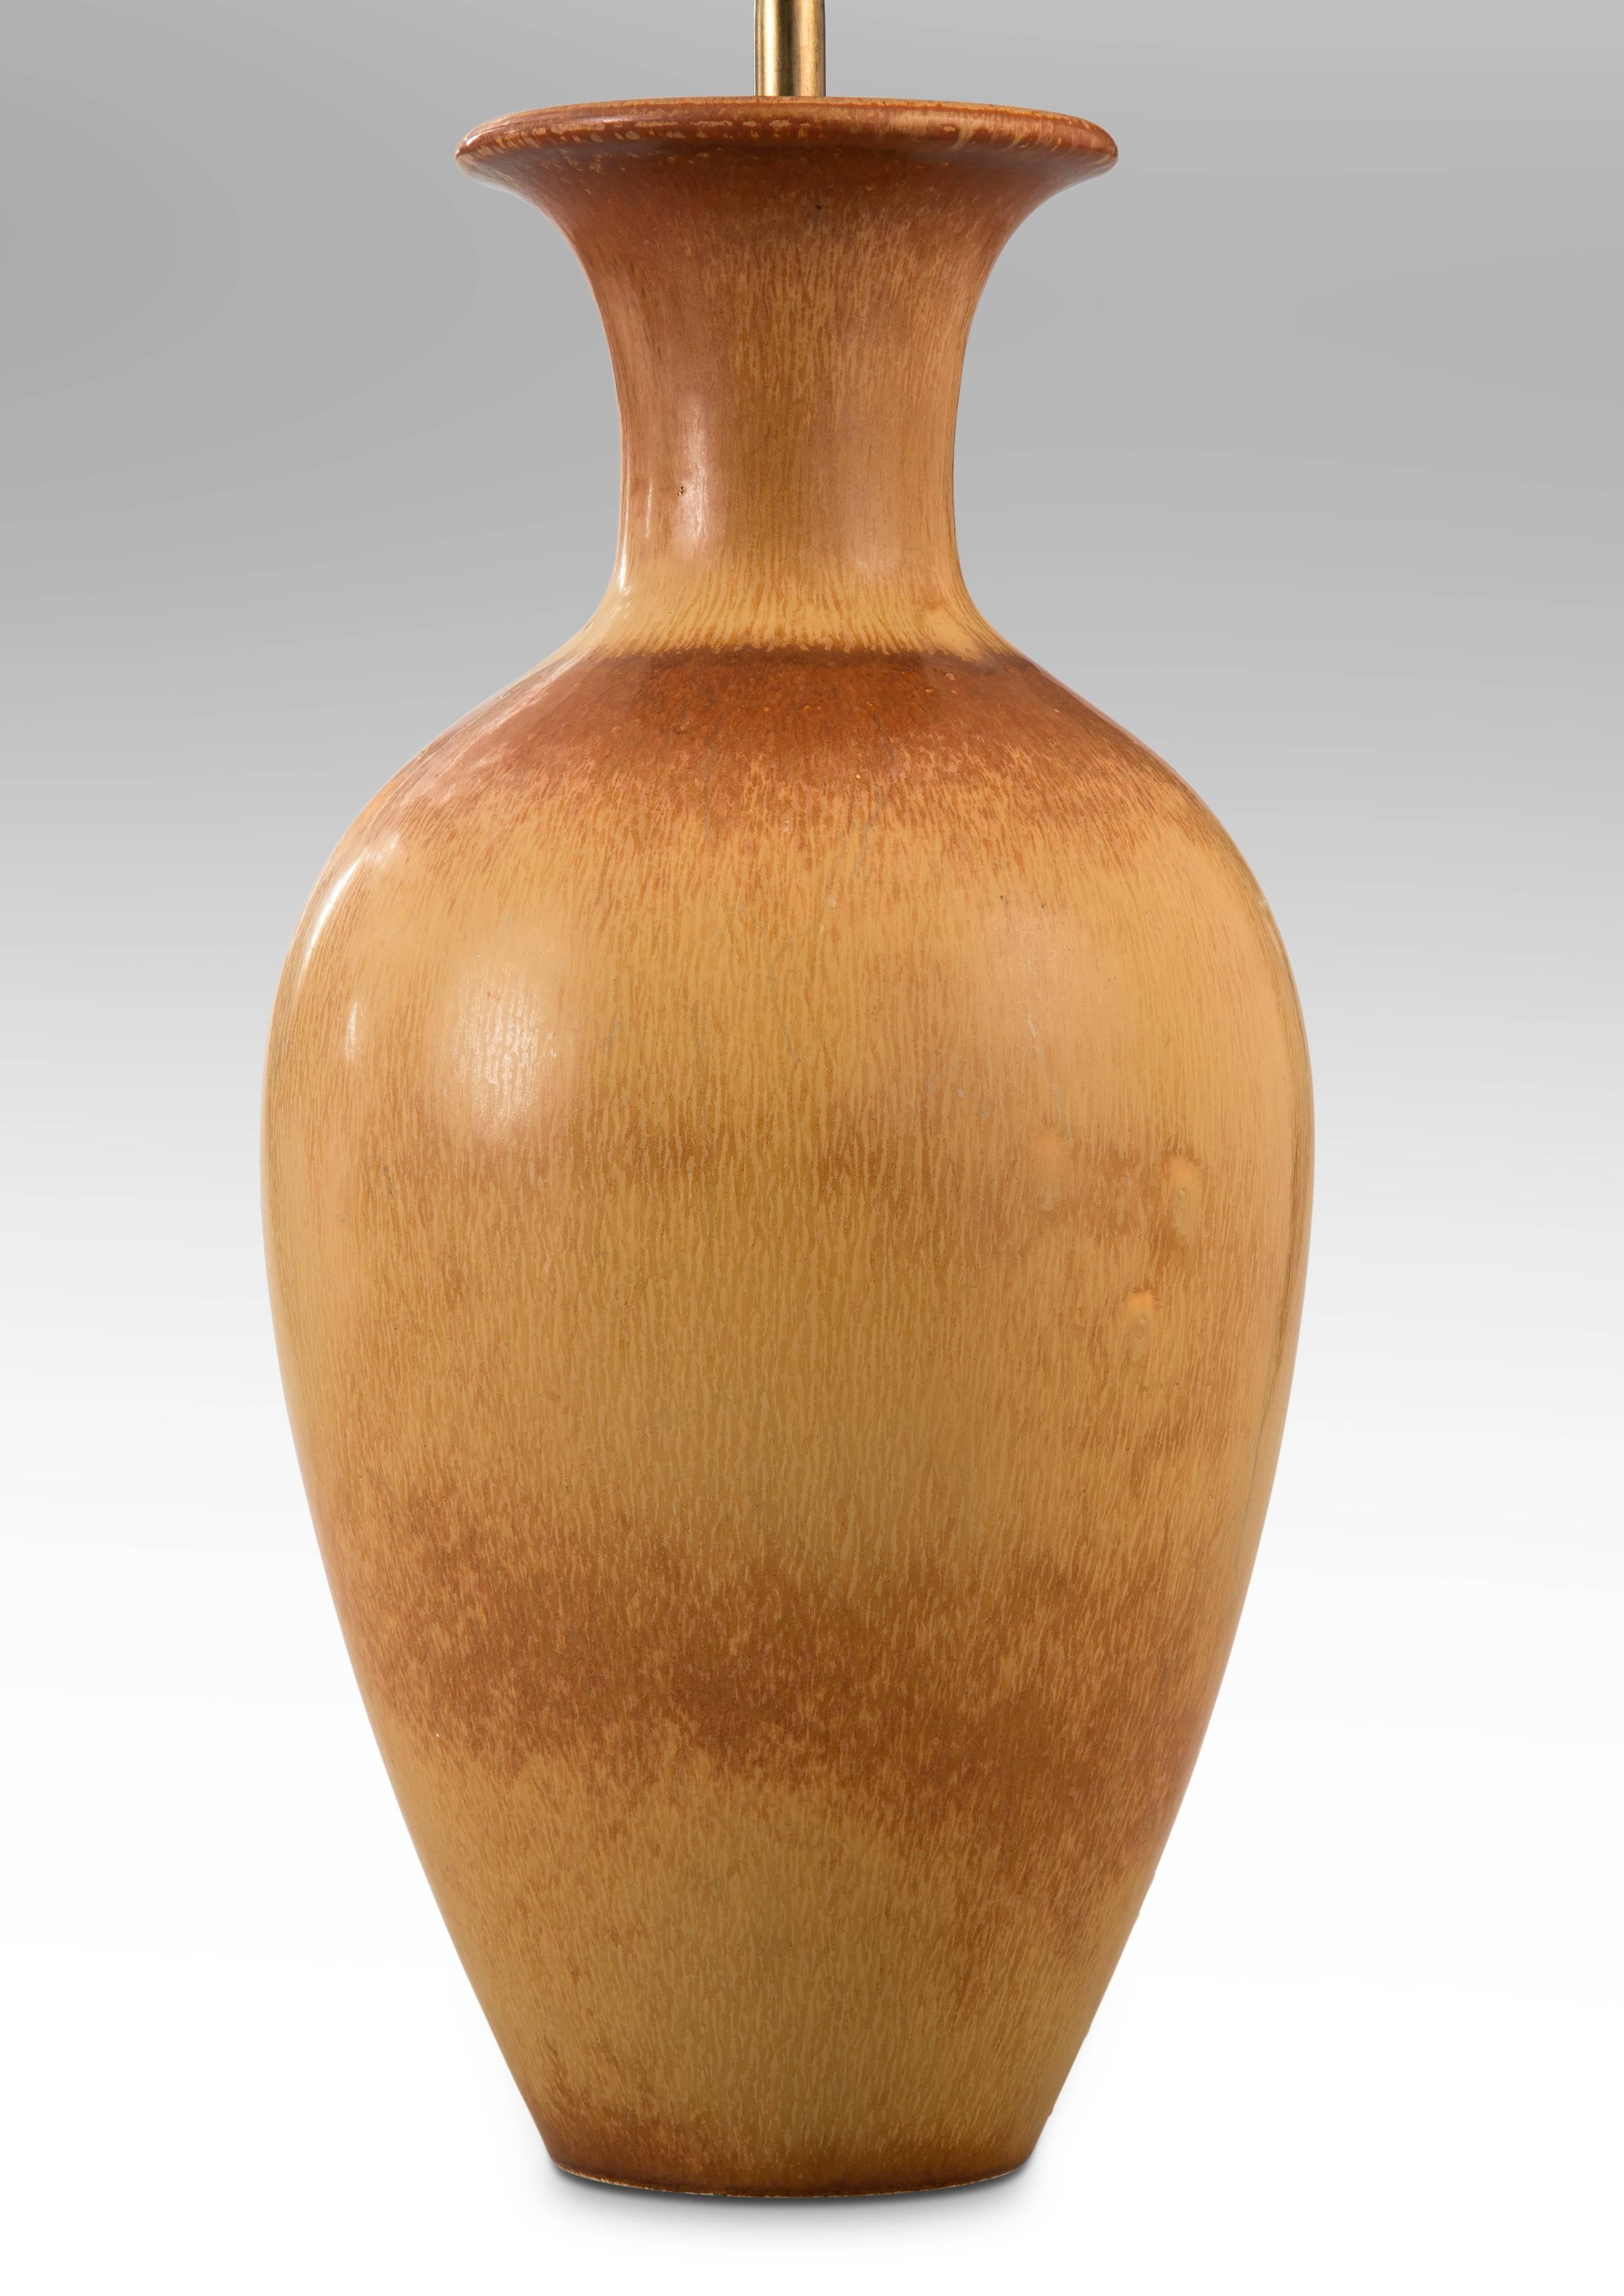 The flared neck above an elegant, high shouldered ovoid body, with a tan and richly variegated brown glaze. 

Very good condition and ready to add to your collection. Museum wired, not drilled, lamp can easily be converted back into a vase. 